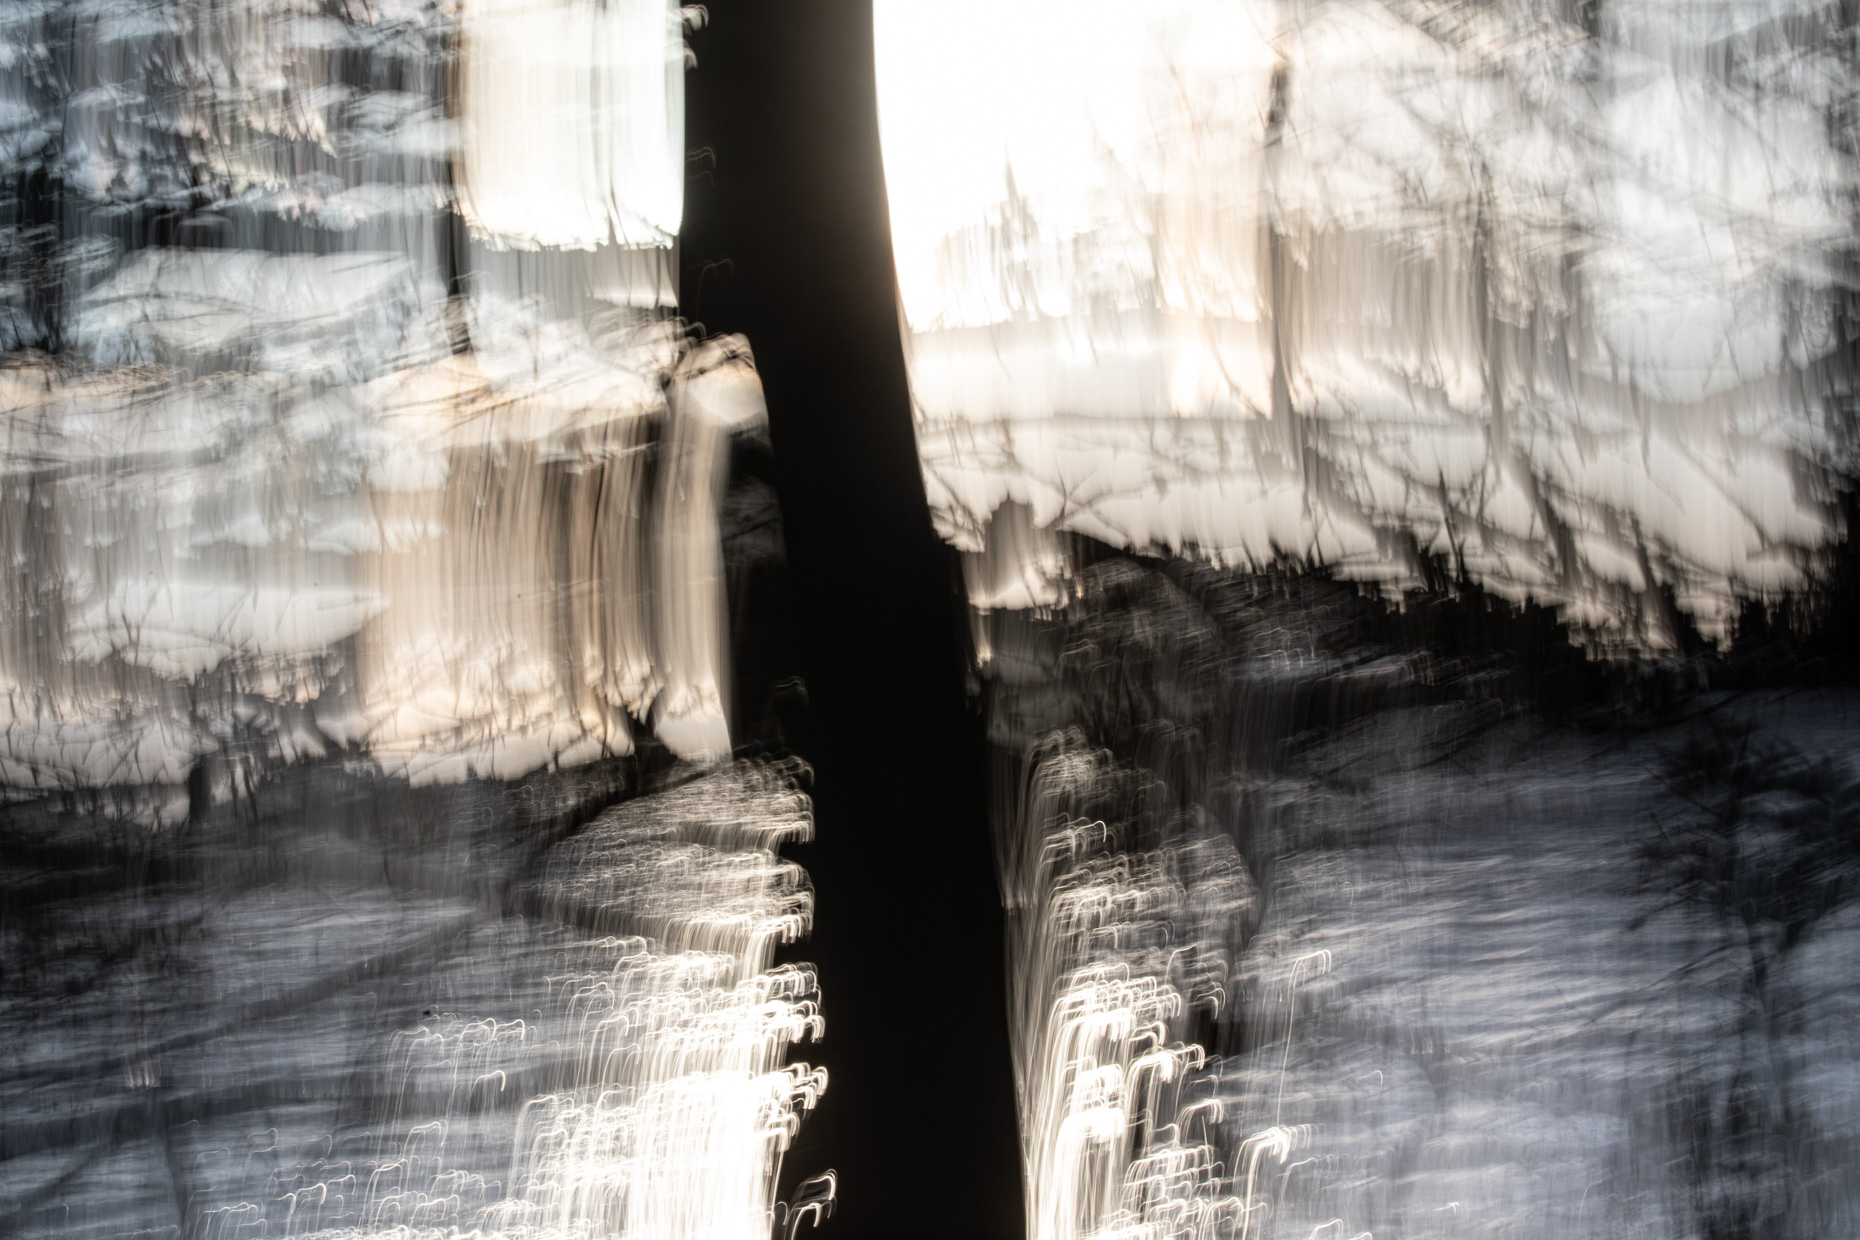 climate_change_winter_ice_Saint_Lawrence_River_Quebec_ICM_intentional_camera_movement-12